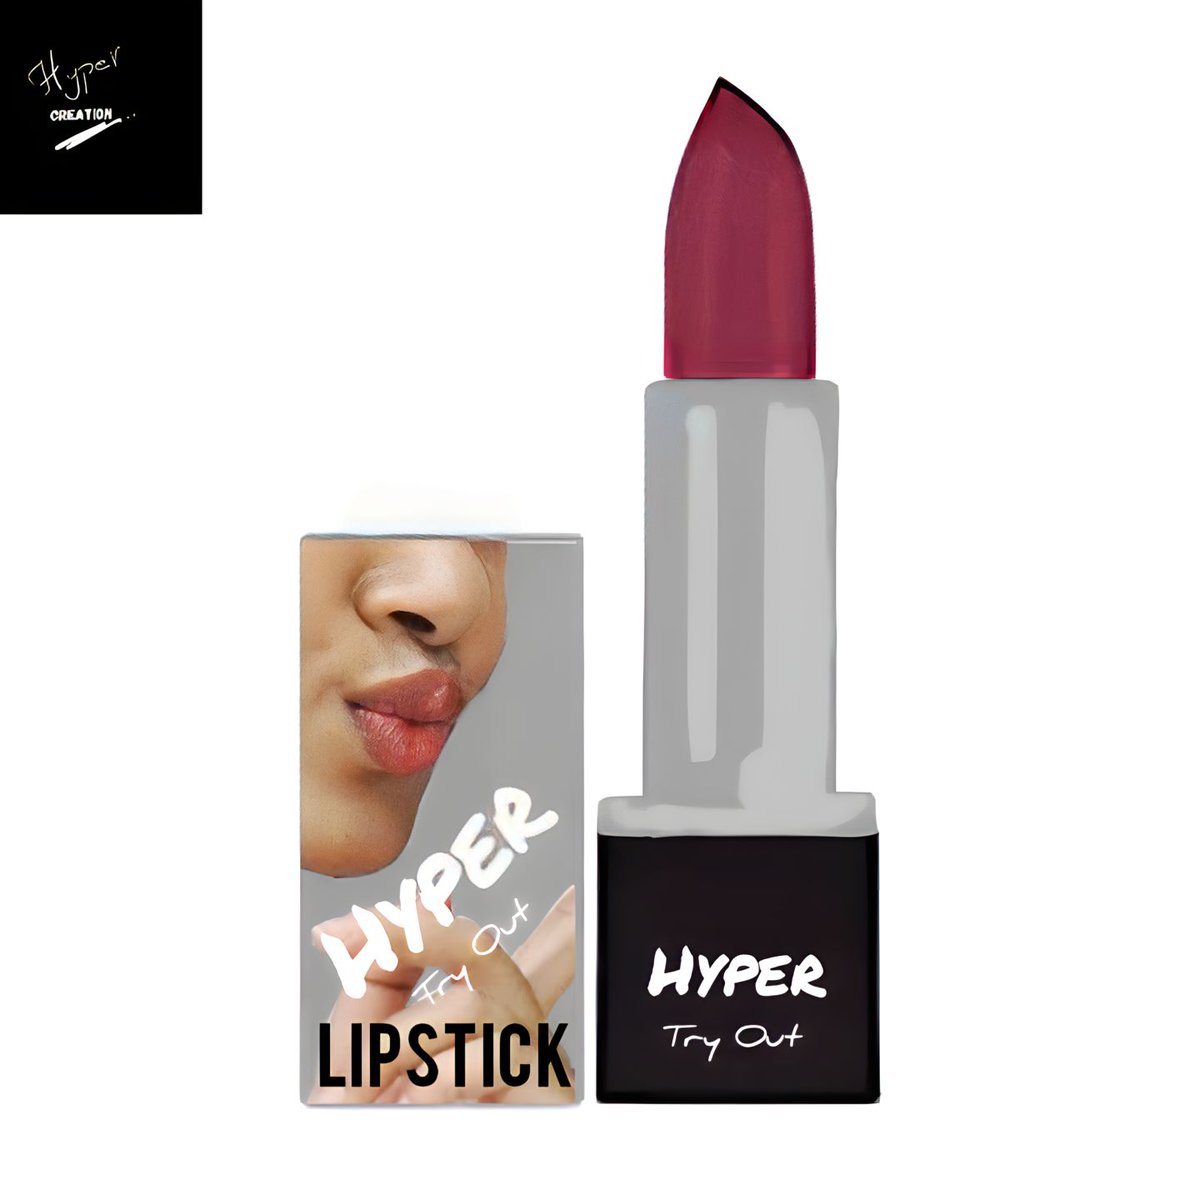 Product name: Hyper Lipstick Product type: Lipstick Tagline: Try Out Logo: Hyper_Creation Hyper Lipstick💄-Try Out. #lip #lips #lipstick #lipstick💄 #lipsticks #digitalmarketing #digitalmarketingtips #digitalmarketers #Hyper_Creation